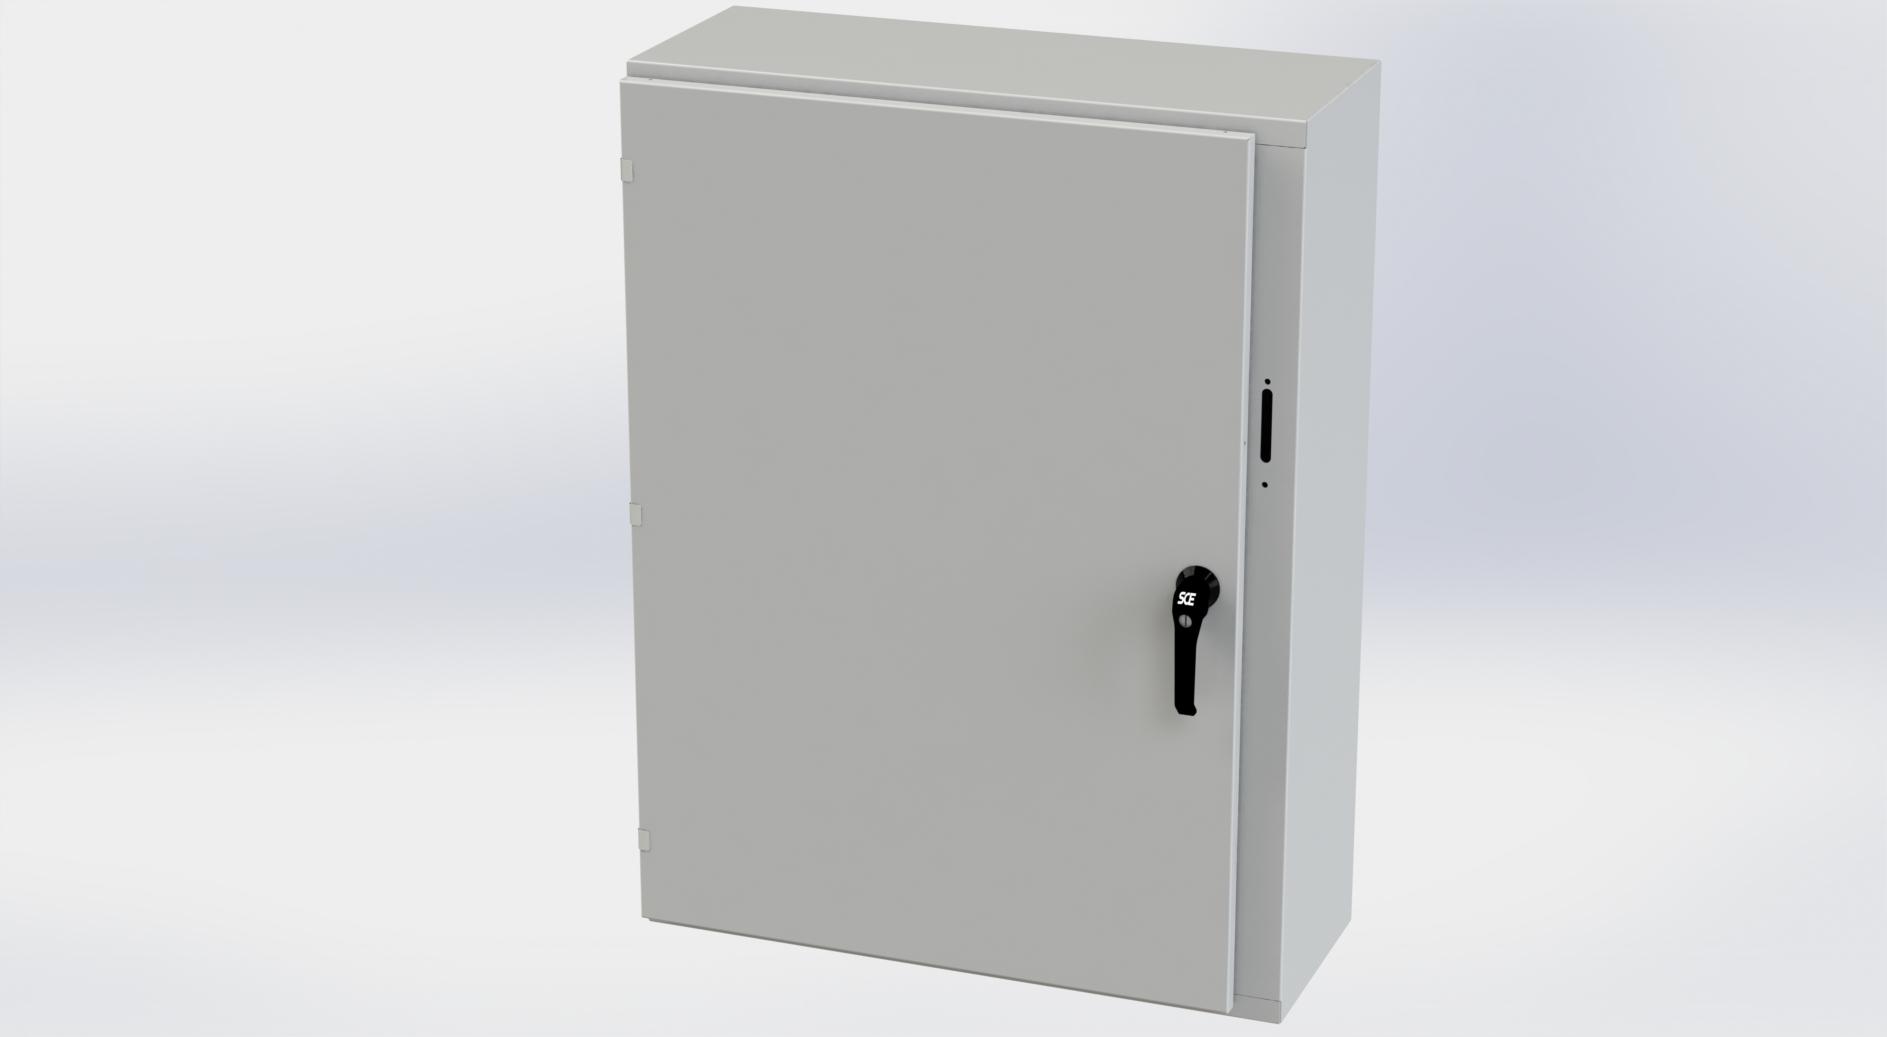 Saginaw Control SCE-42XEL3112LPLG XEL LP Enclosure, Height:42.00", Width:31.38", Depth:12.00", RAL 7035 gray powder coating inside and out. Optional sub-panels are powder coated white.